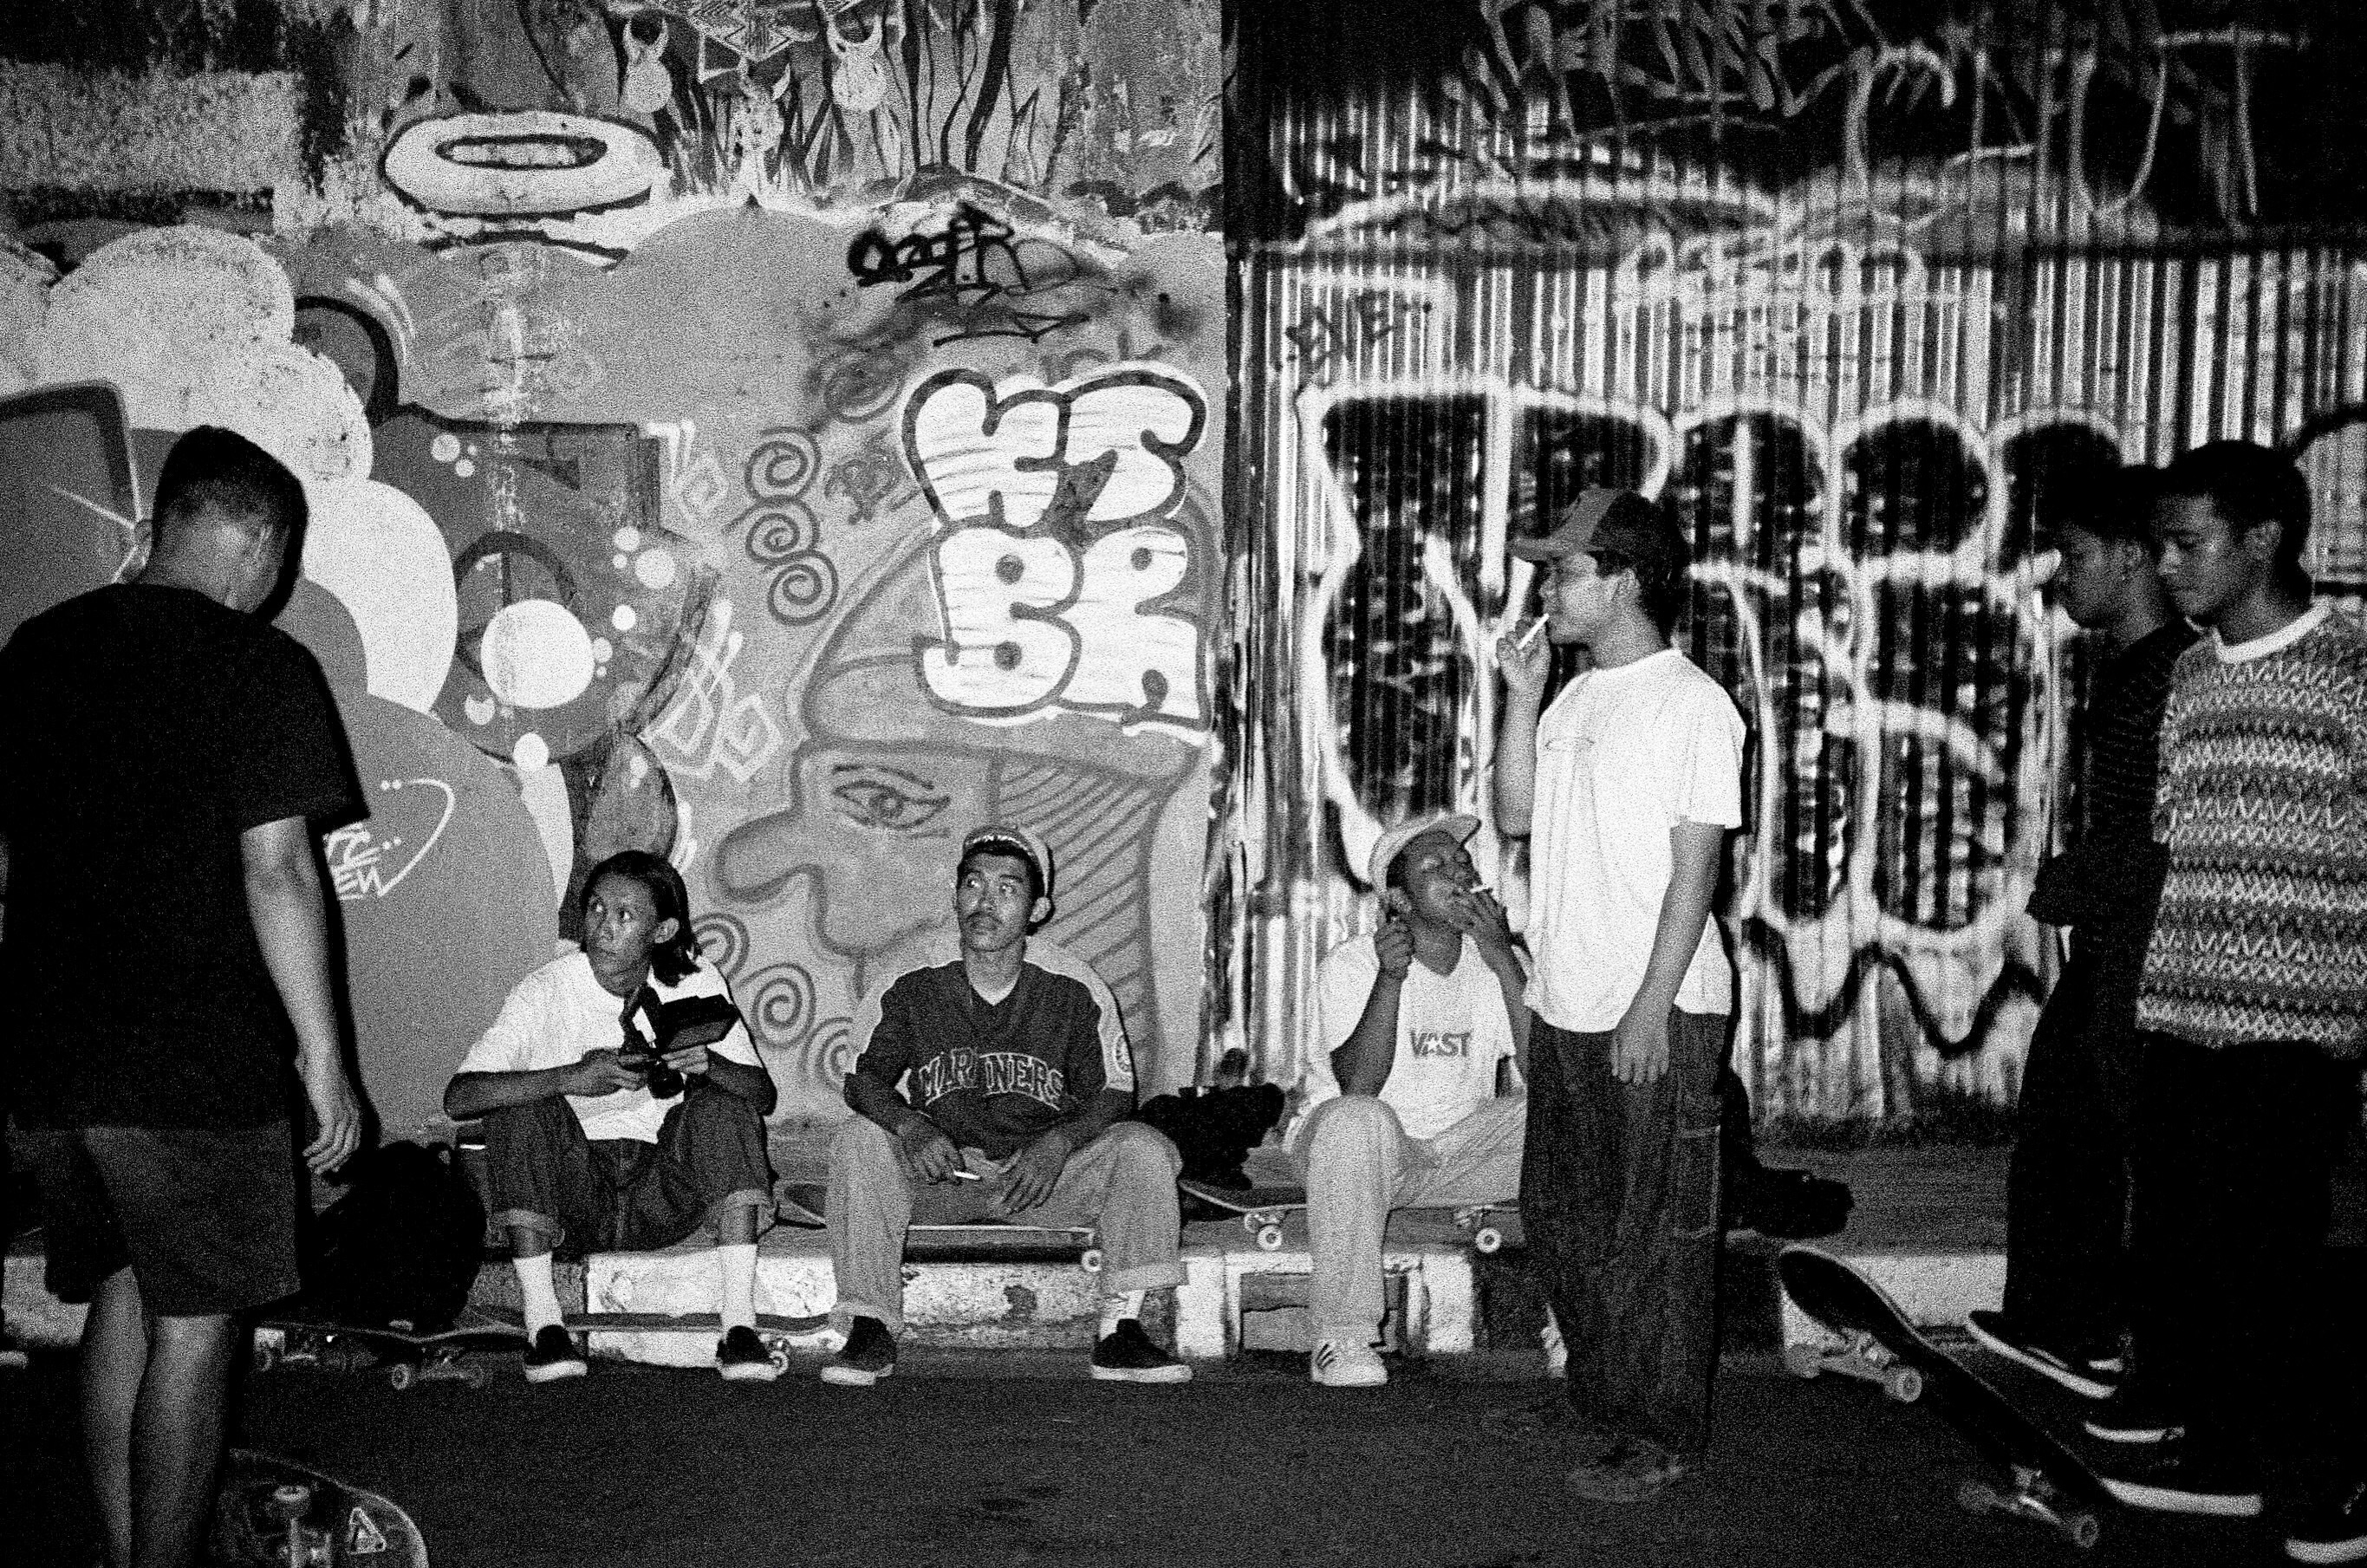 Skateboarders sitting on their boards and smoking outside a graffiti covered wall. 